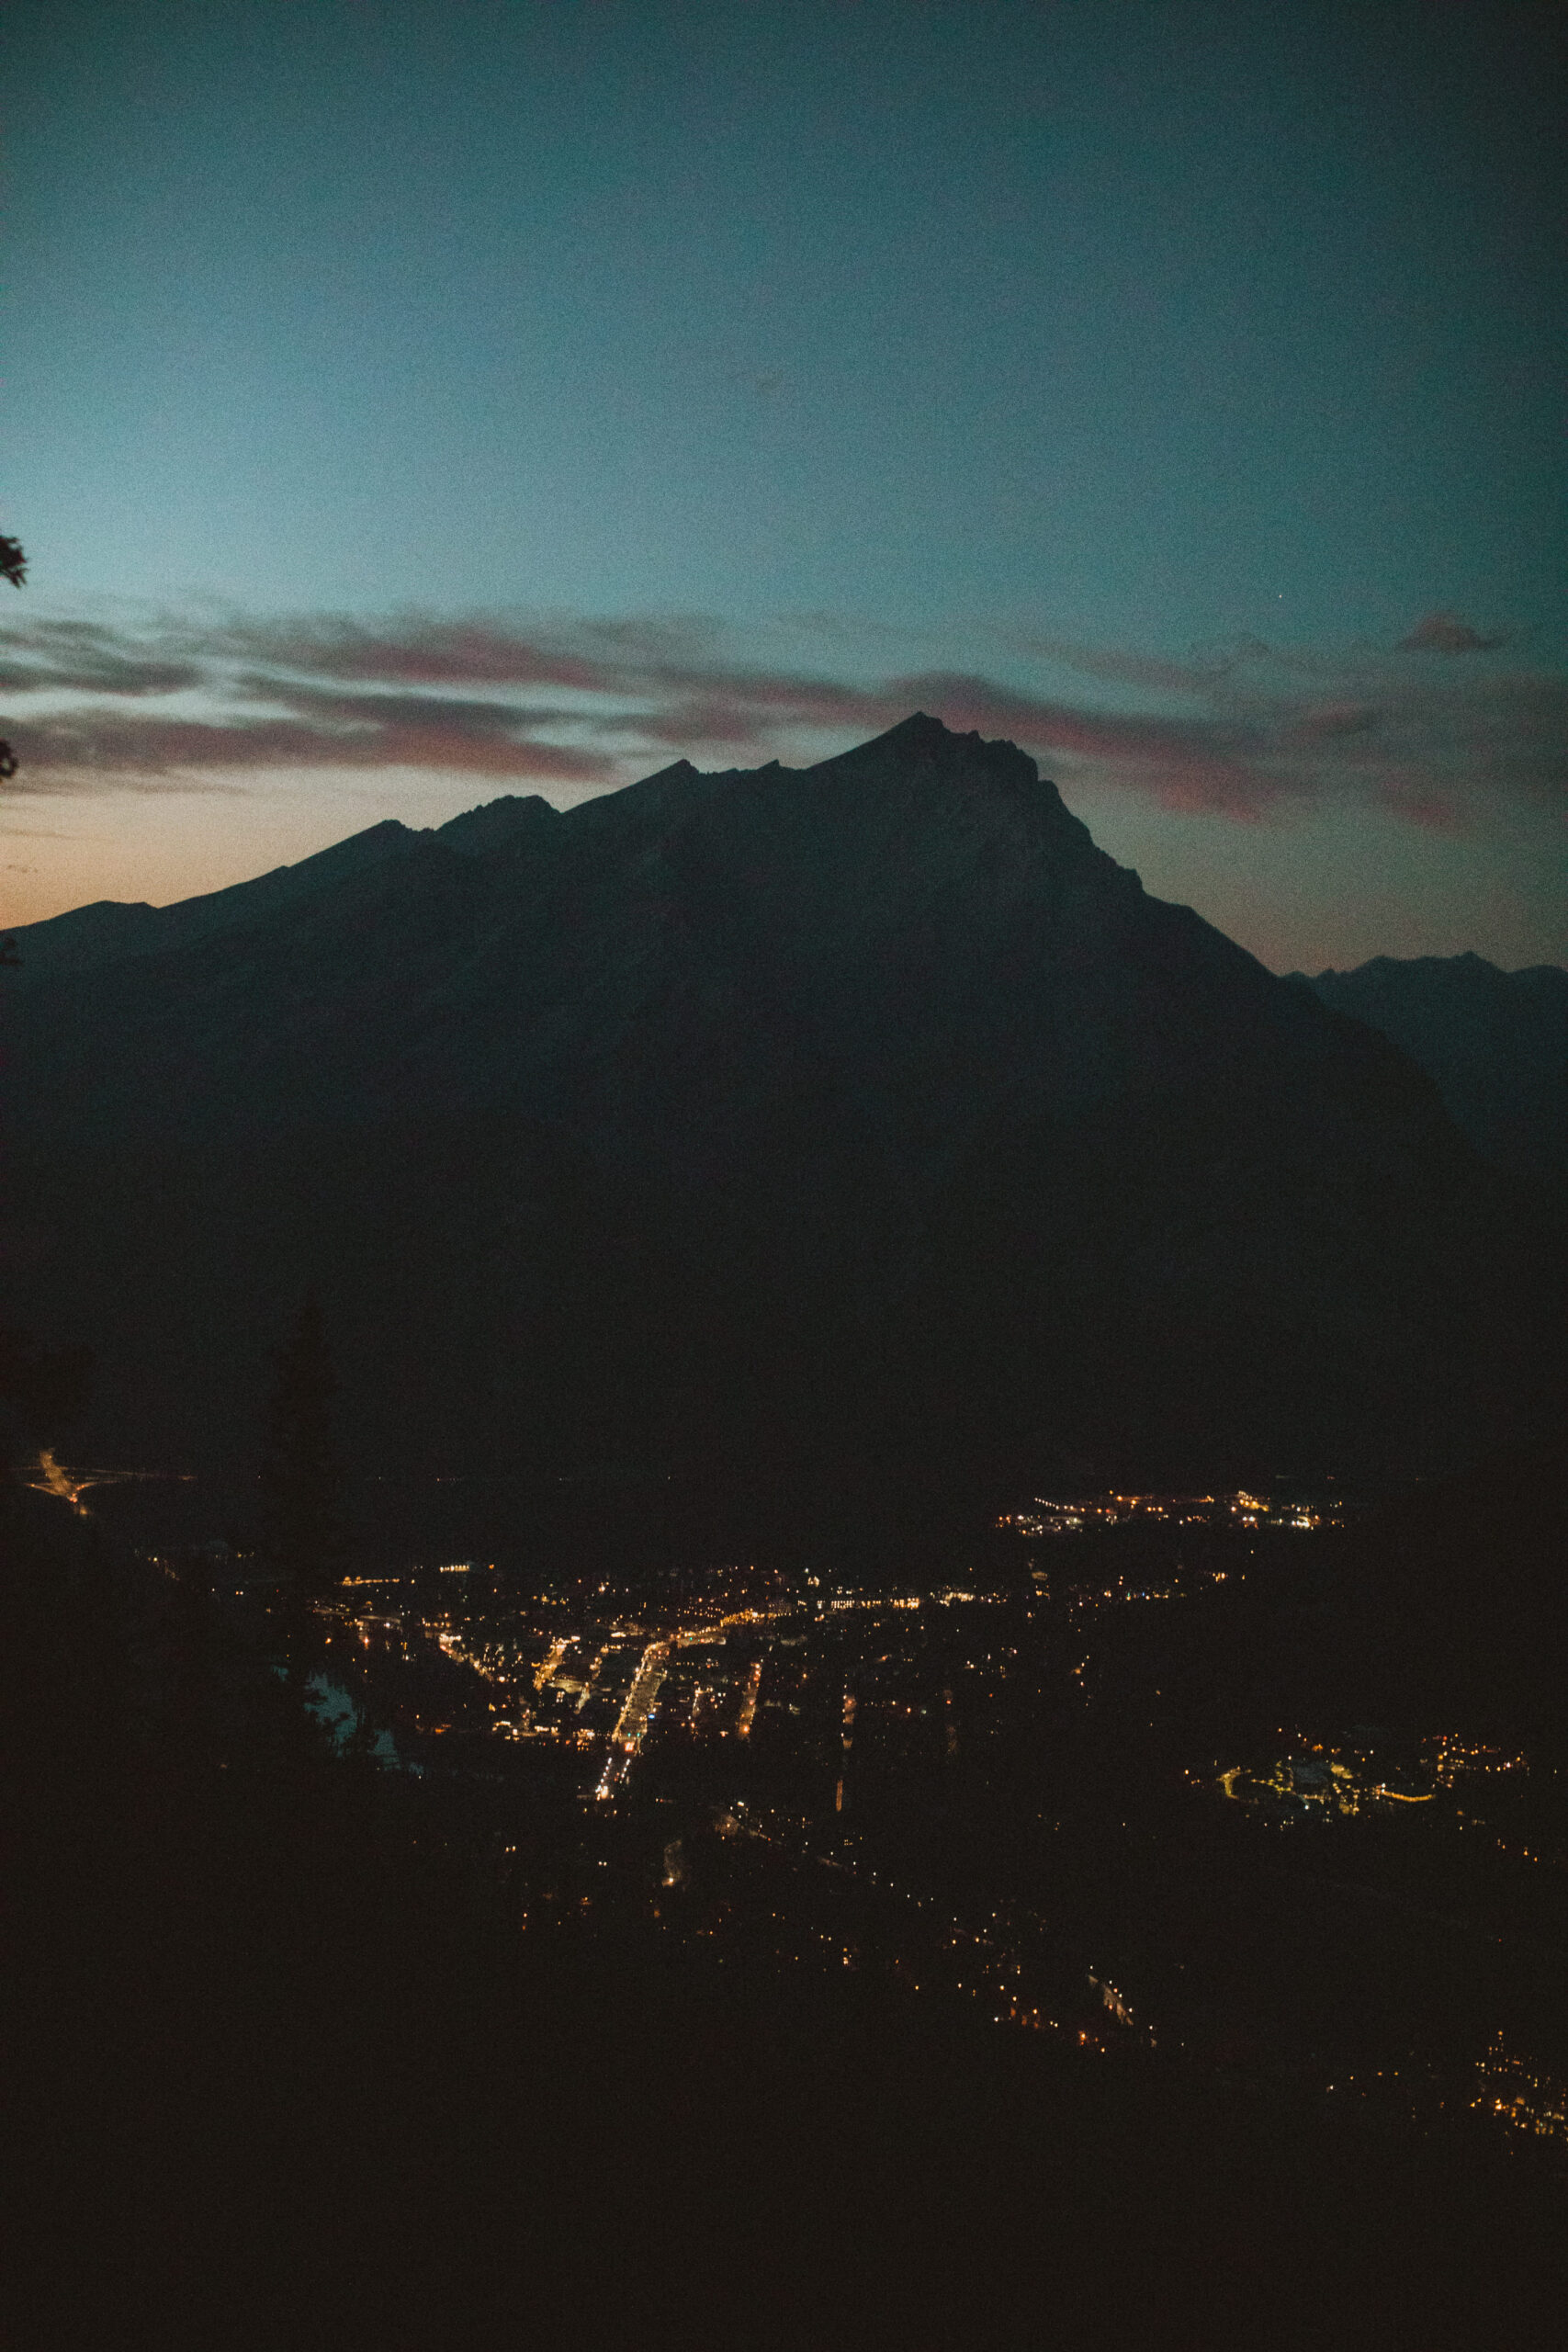 town of banff lit up at night, view from the banff gondola